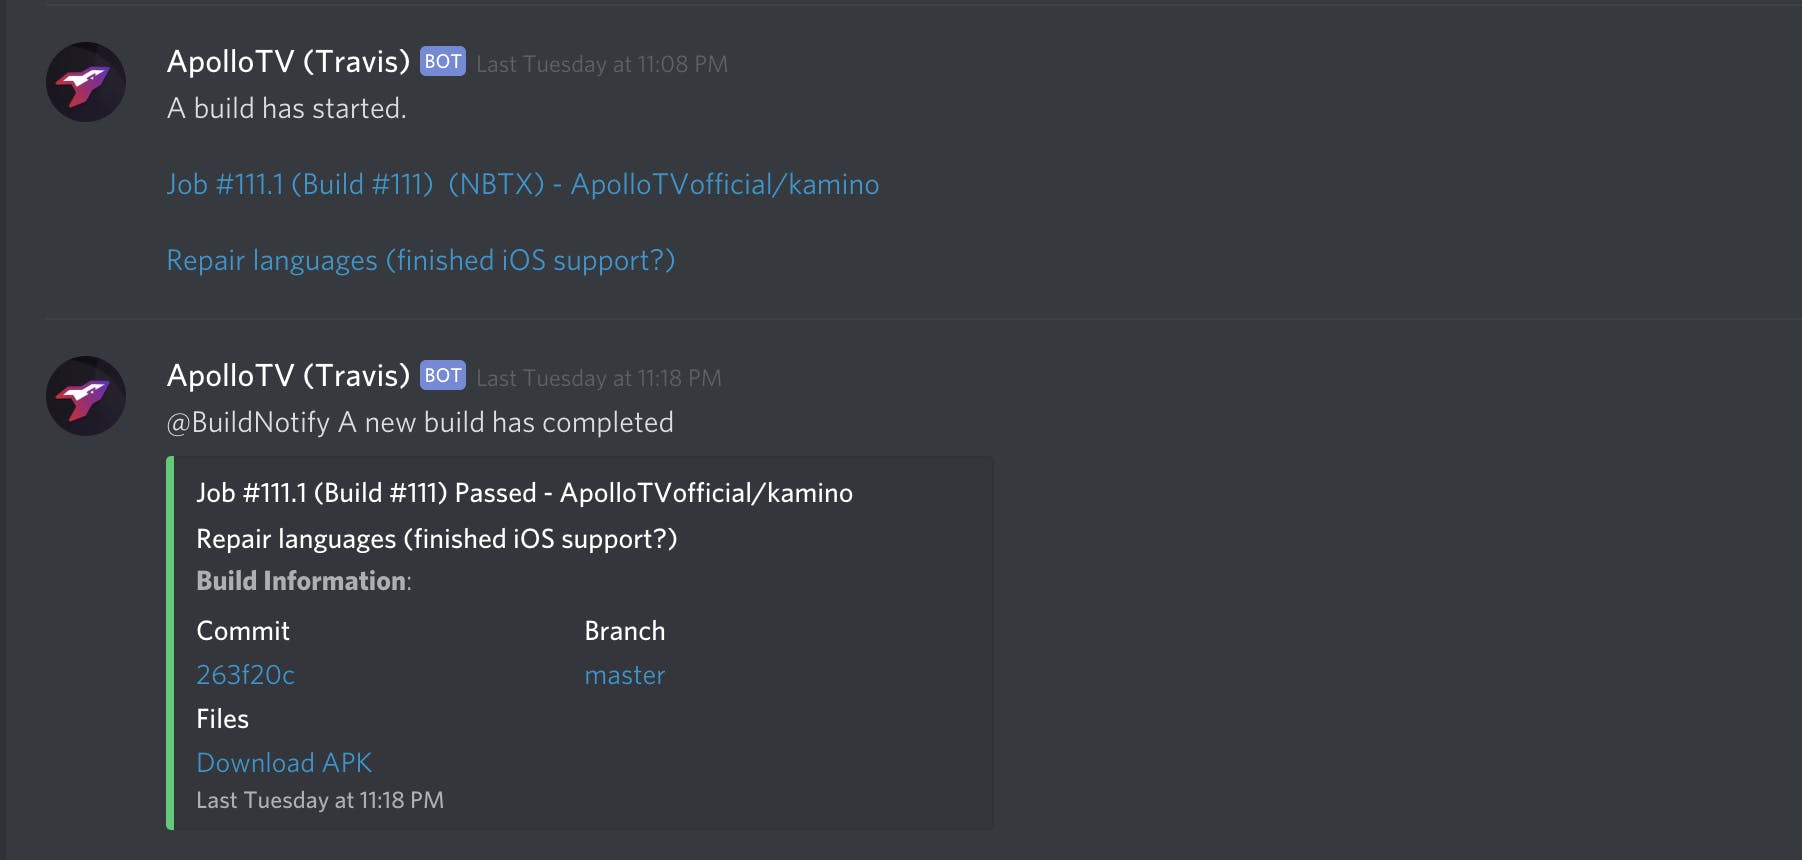 We have web-hooks that send a message to a channel in our Discord server when a build has started or ended.